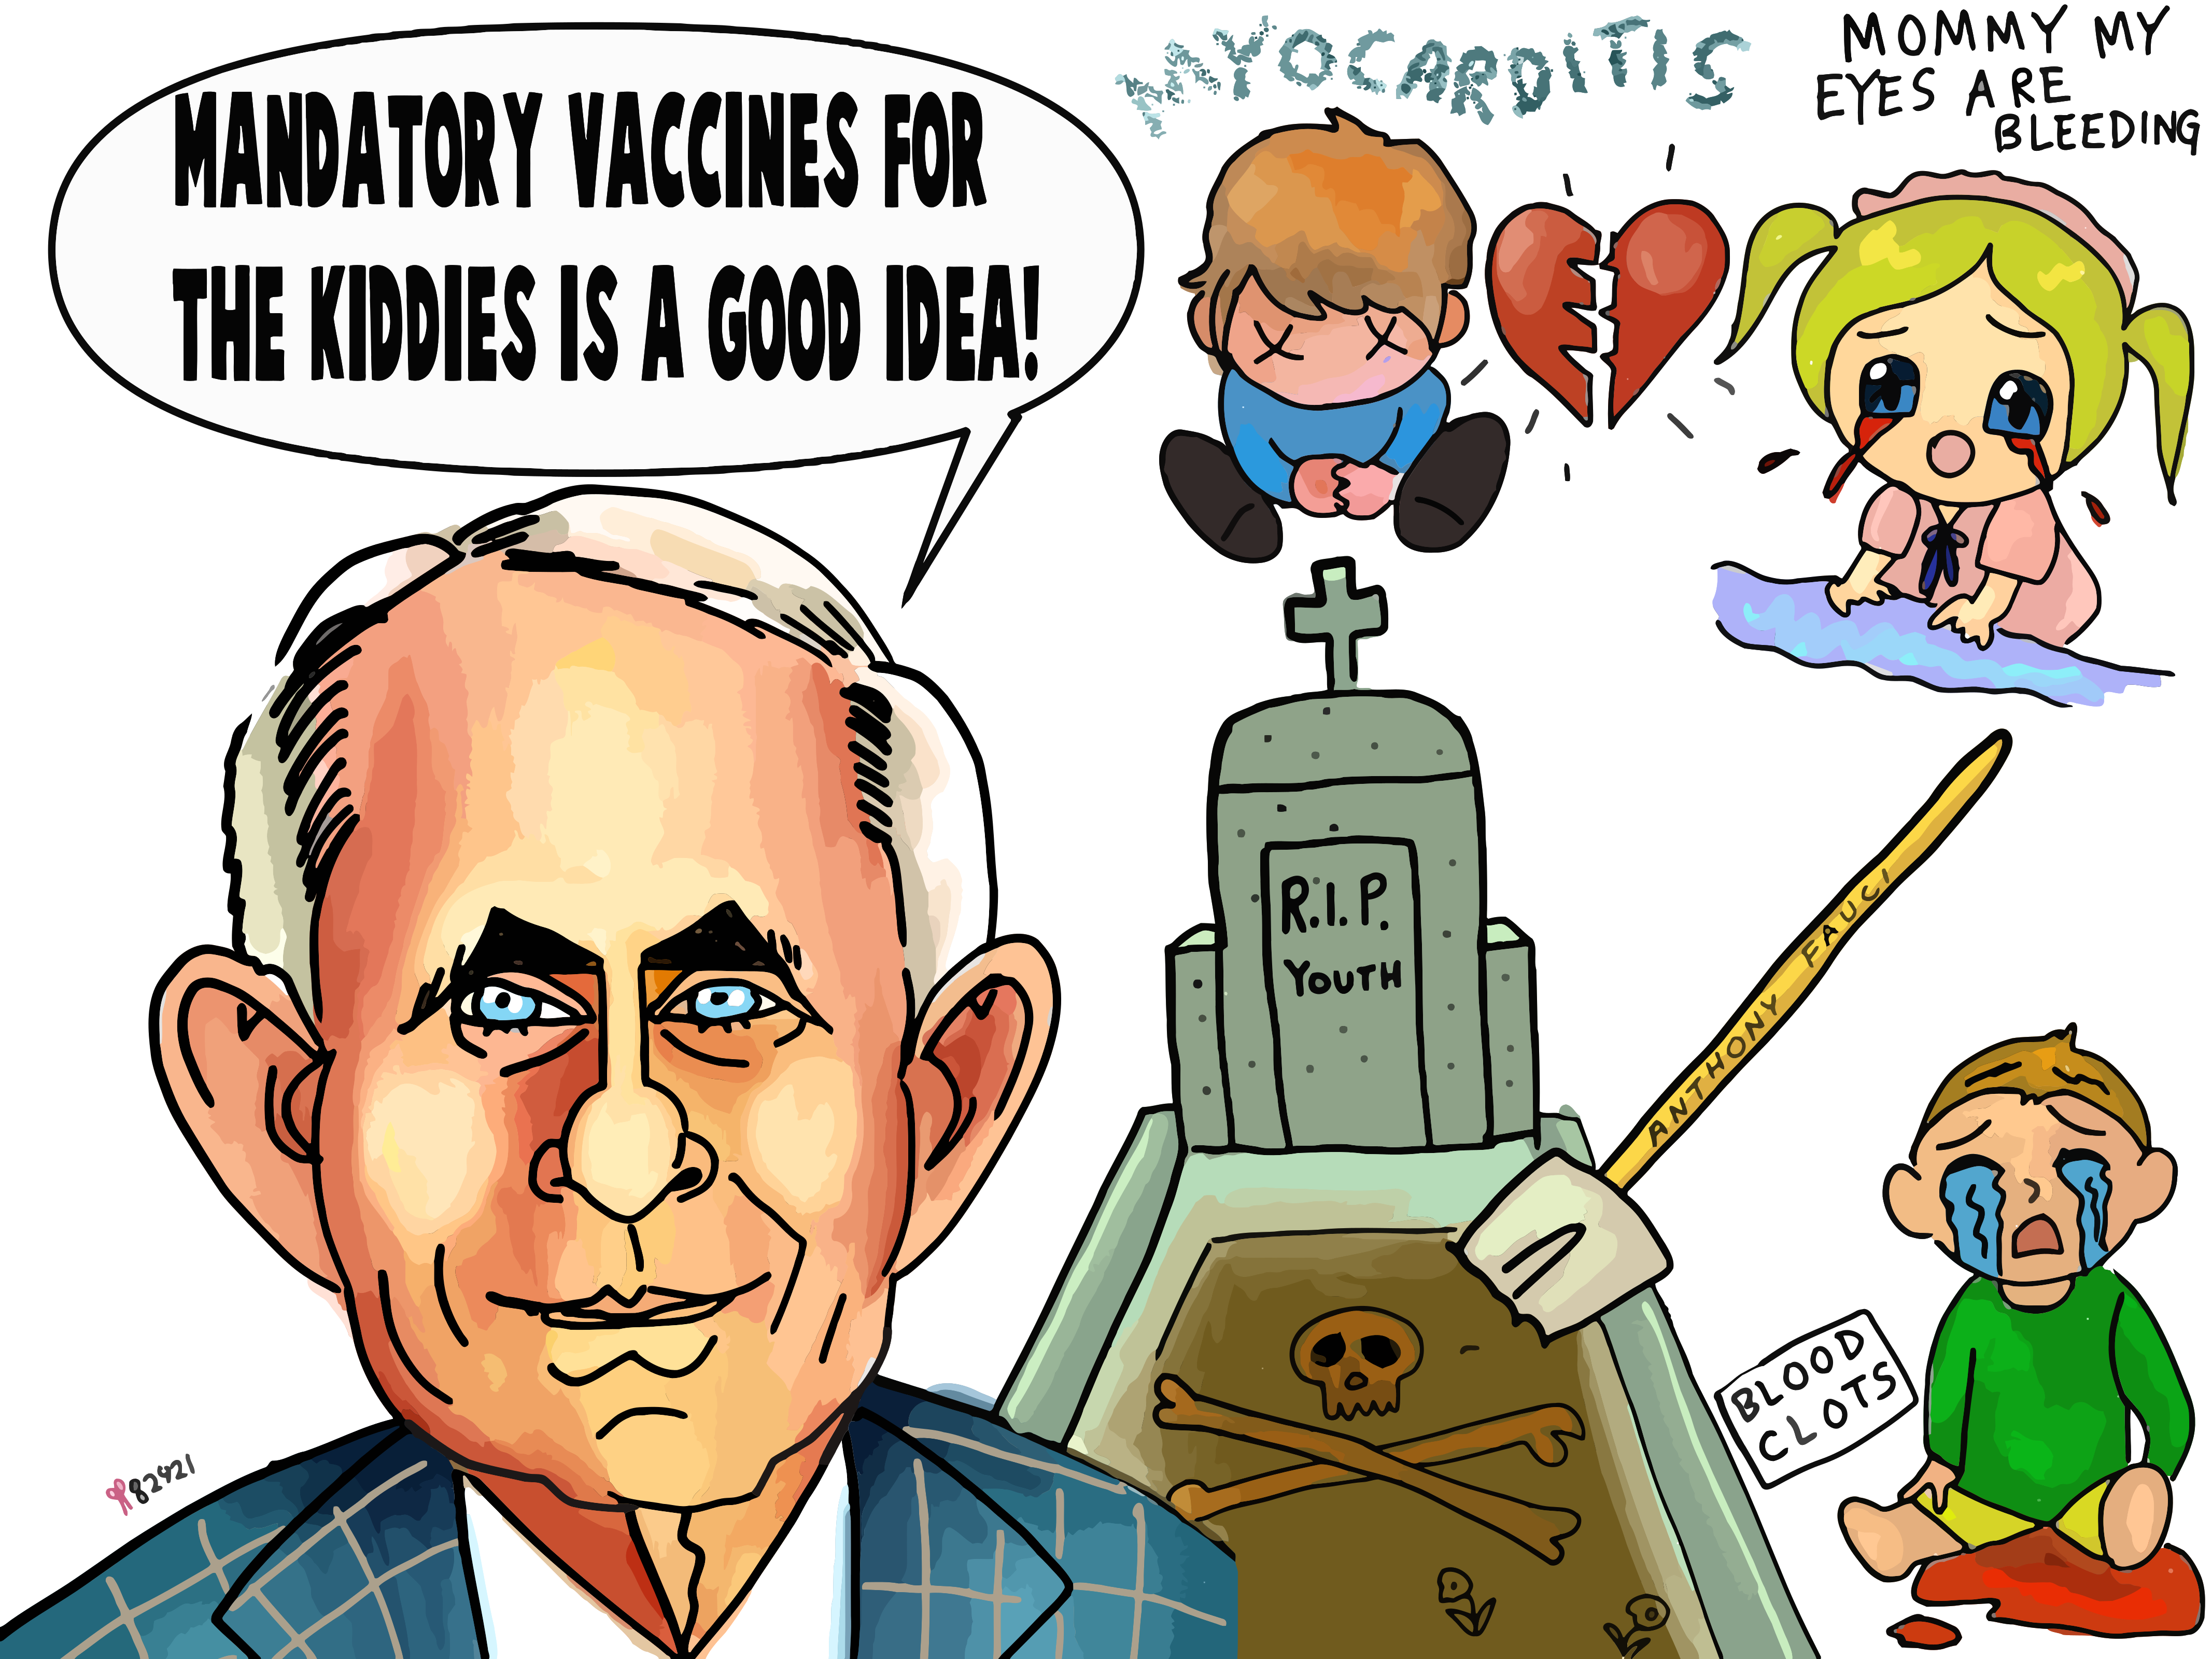 Mandatory Vaccines for Children is a Good Idea. Anthony Fauci Political cartoon post thumbnail image